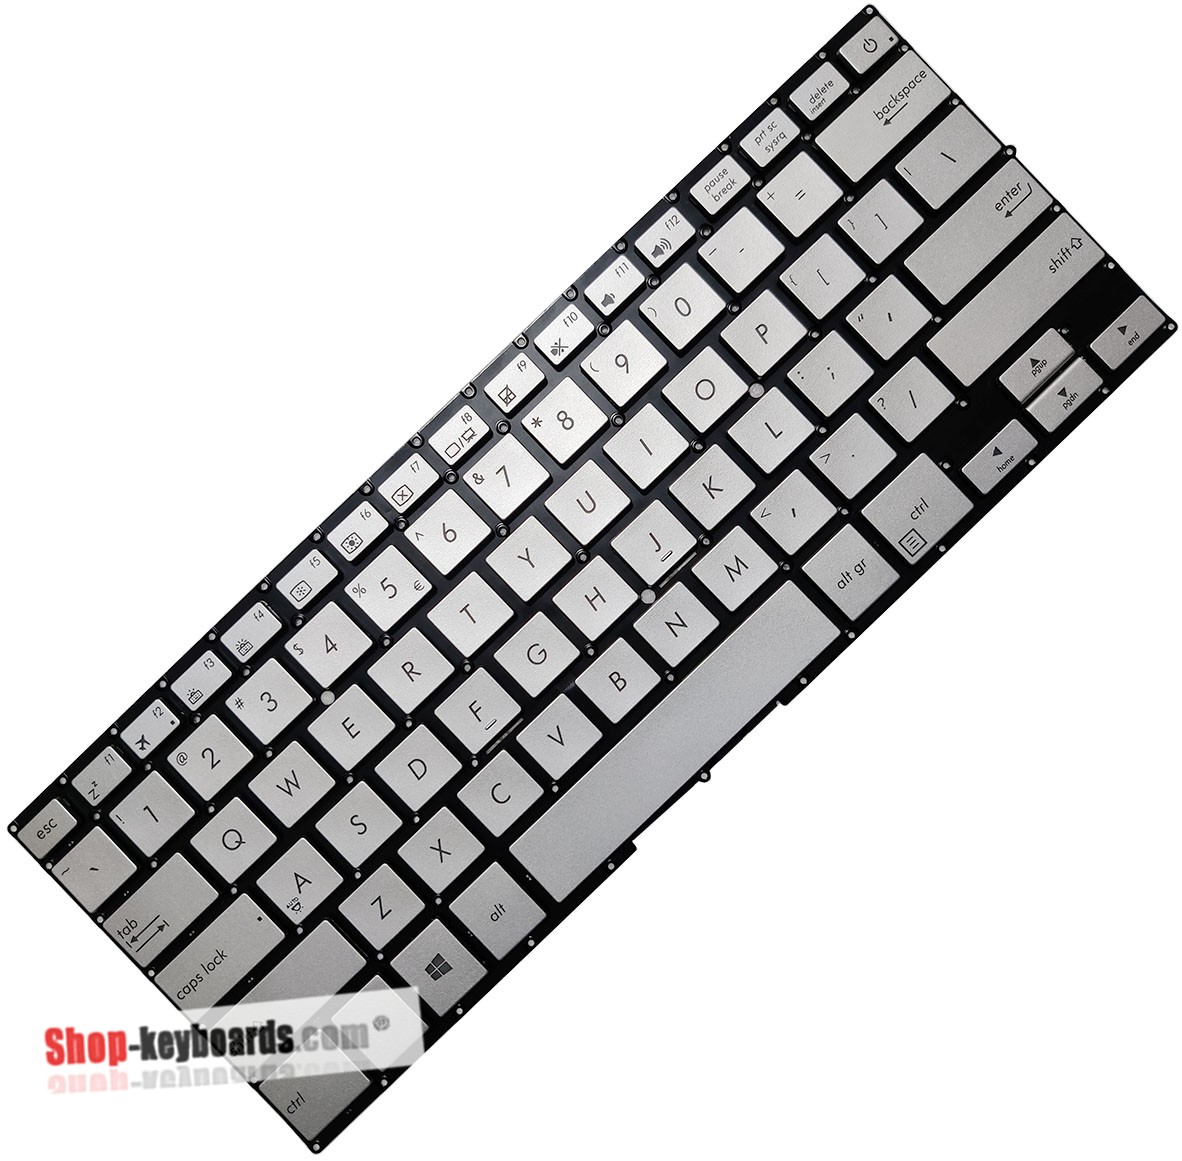 Asus 0KNB0-D620SP00 Keyboard replacement